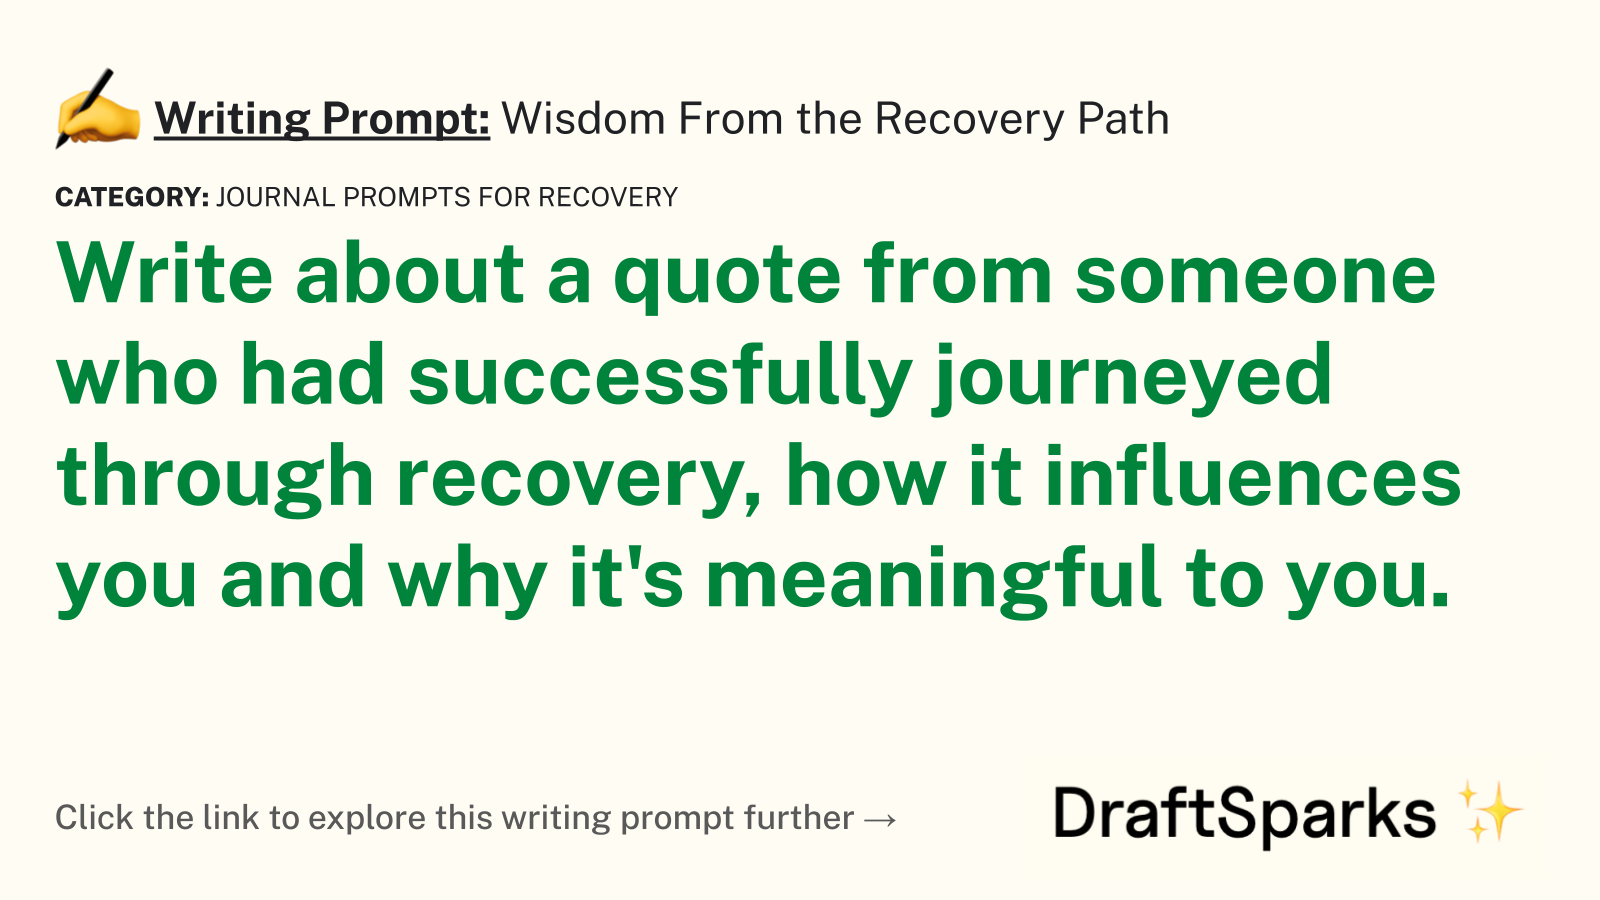 Wisdom From the Recovery Path